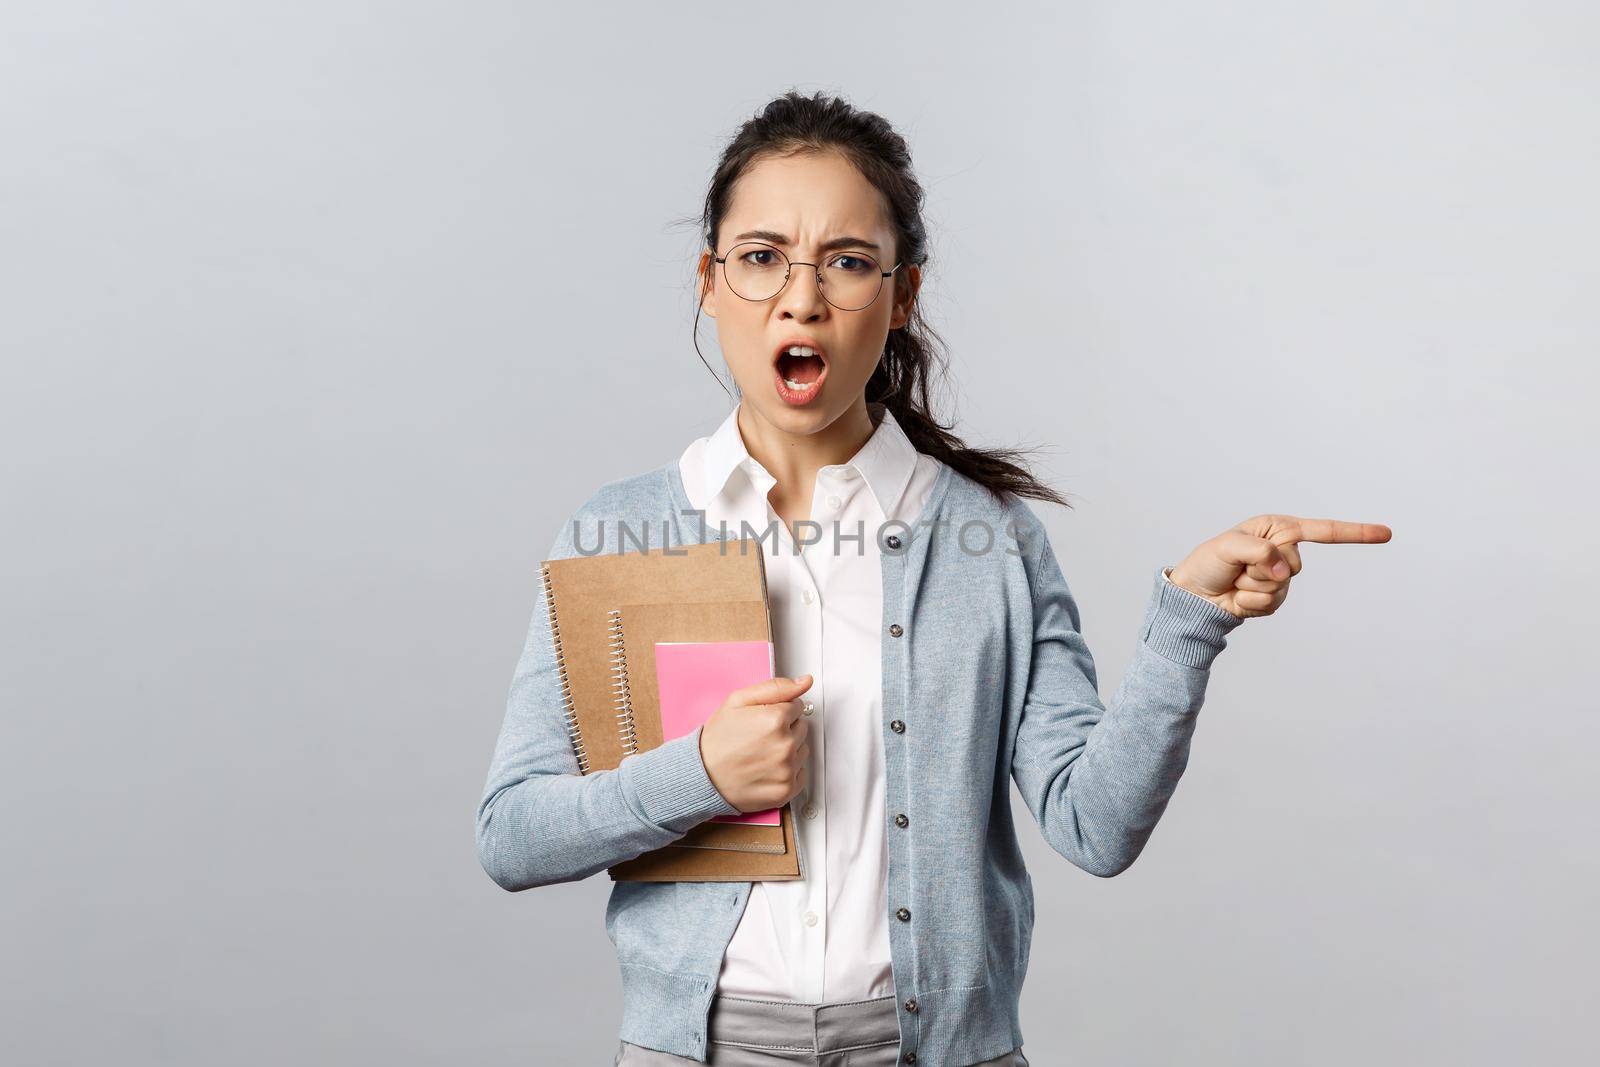 Education, teachers, university and schools concept. Angry and displeased strict tutor, teacher scolding student and tell leave class now, pointing at door shouting annoyed, grey background.